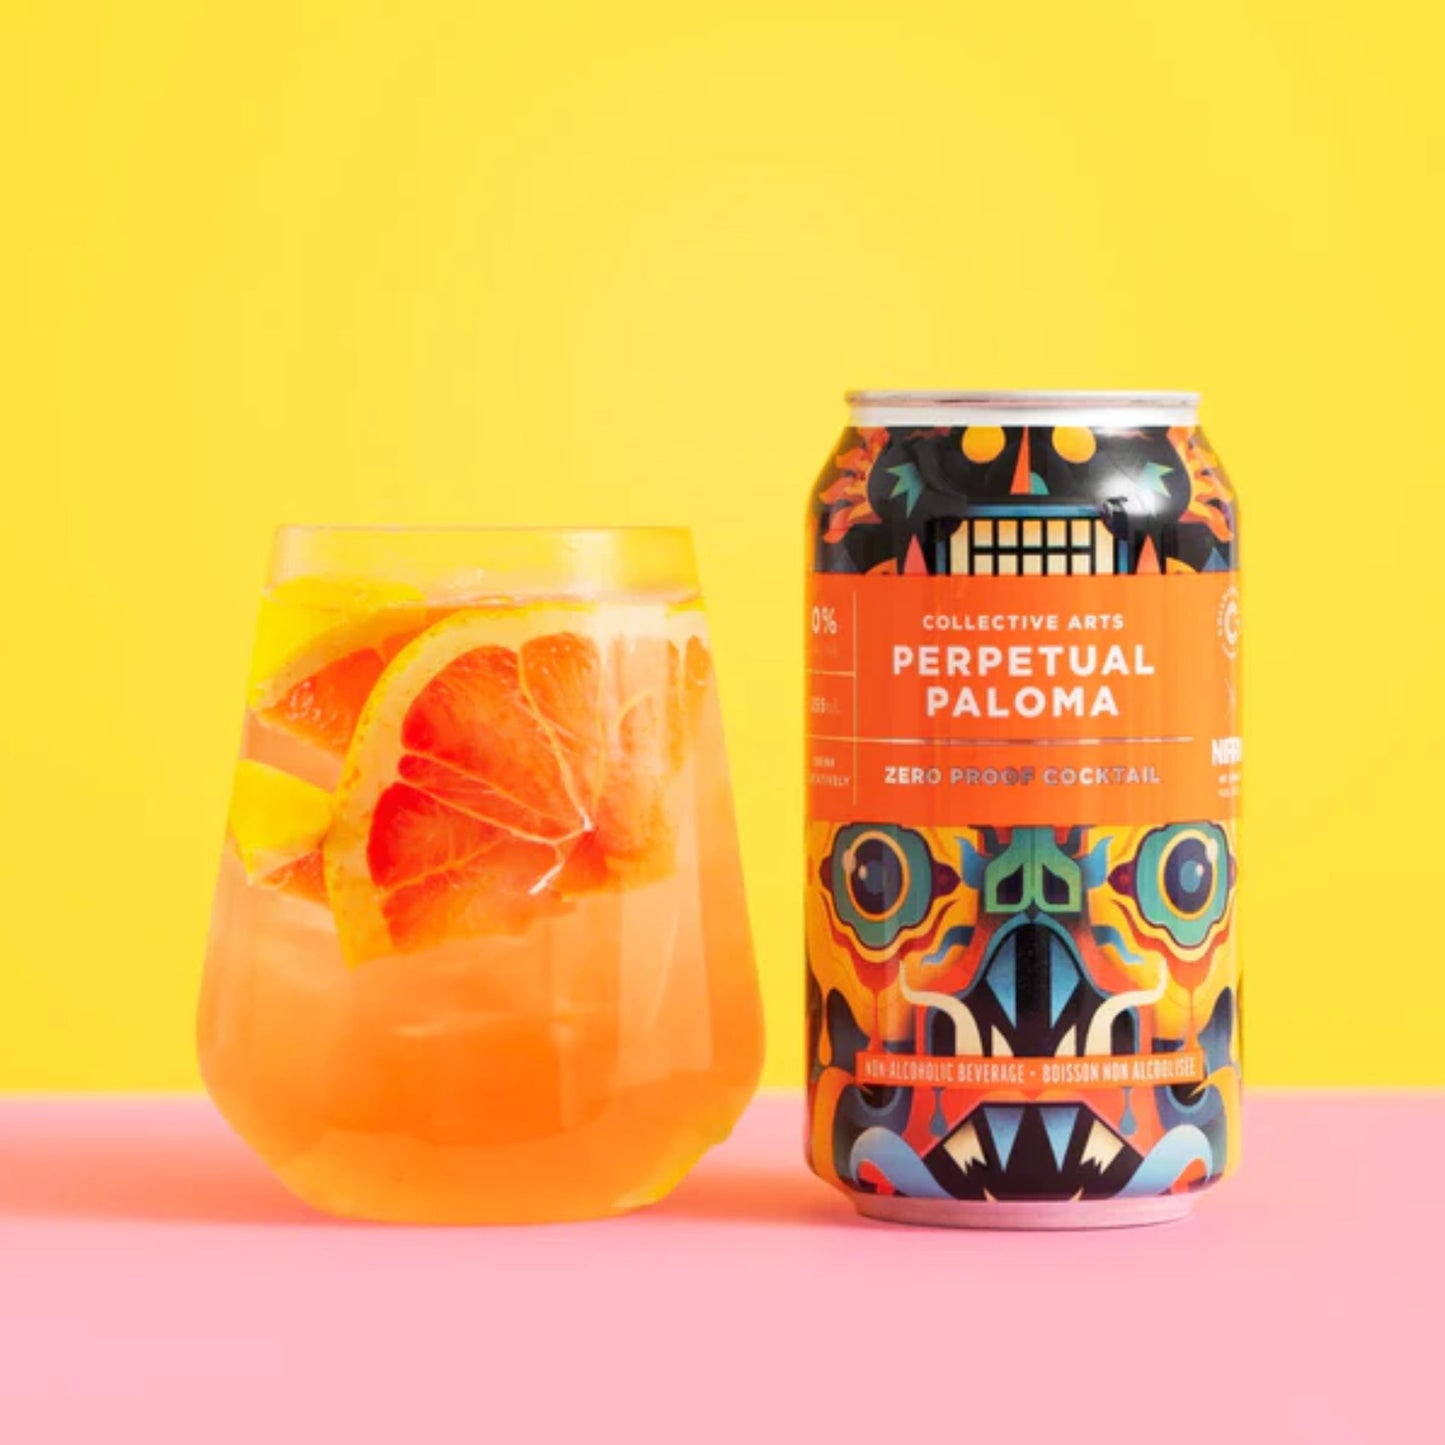 Collective Arts Perpetual Paloma is available at Knyota Non-Alcoholic Drinks.